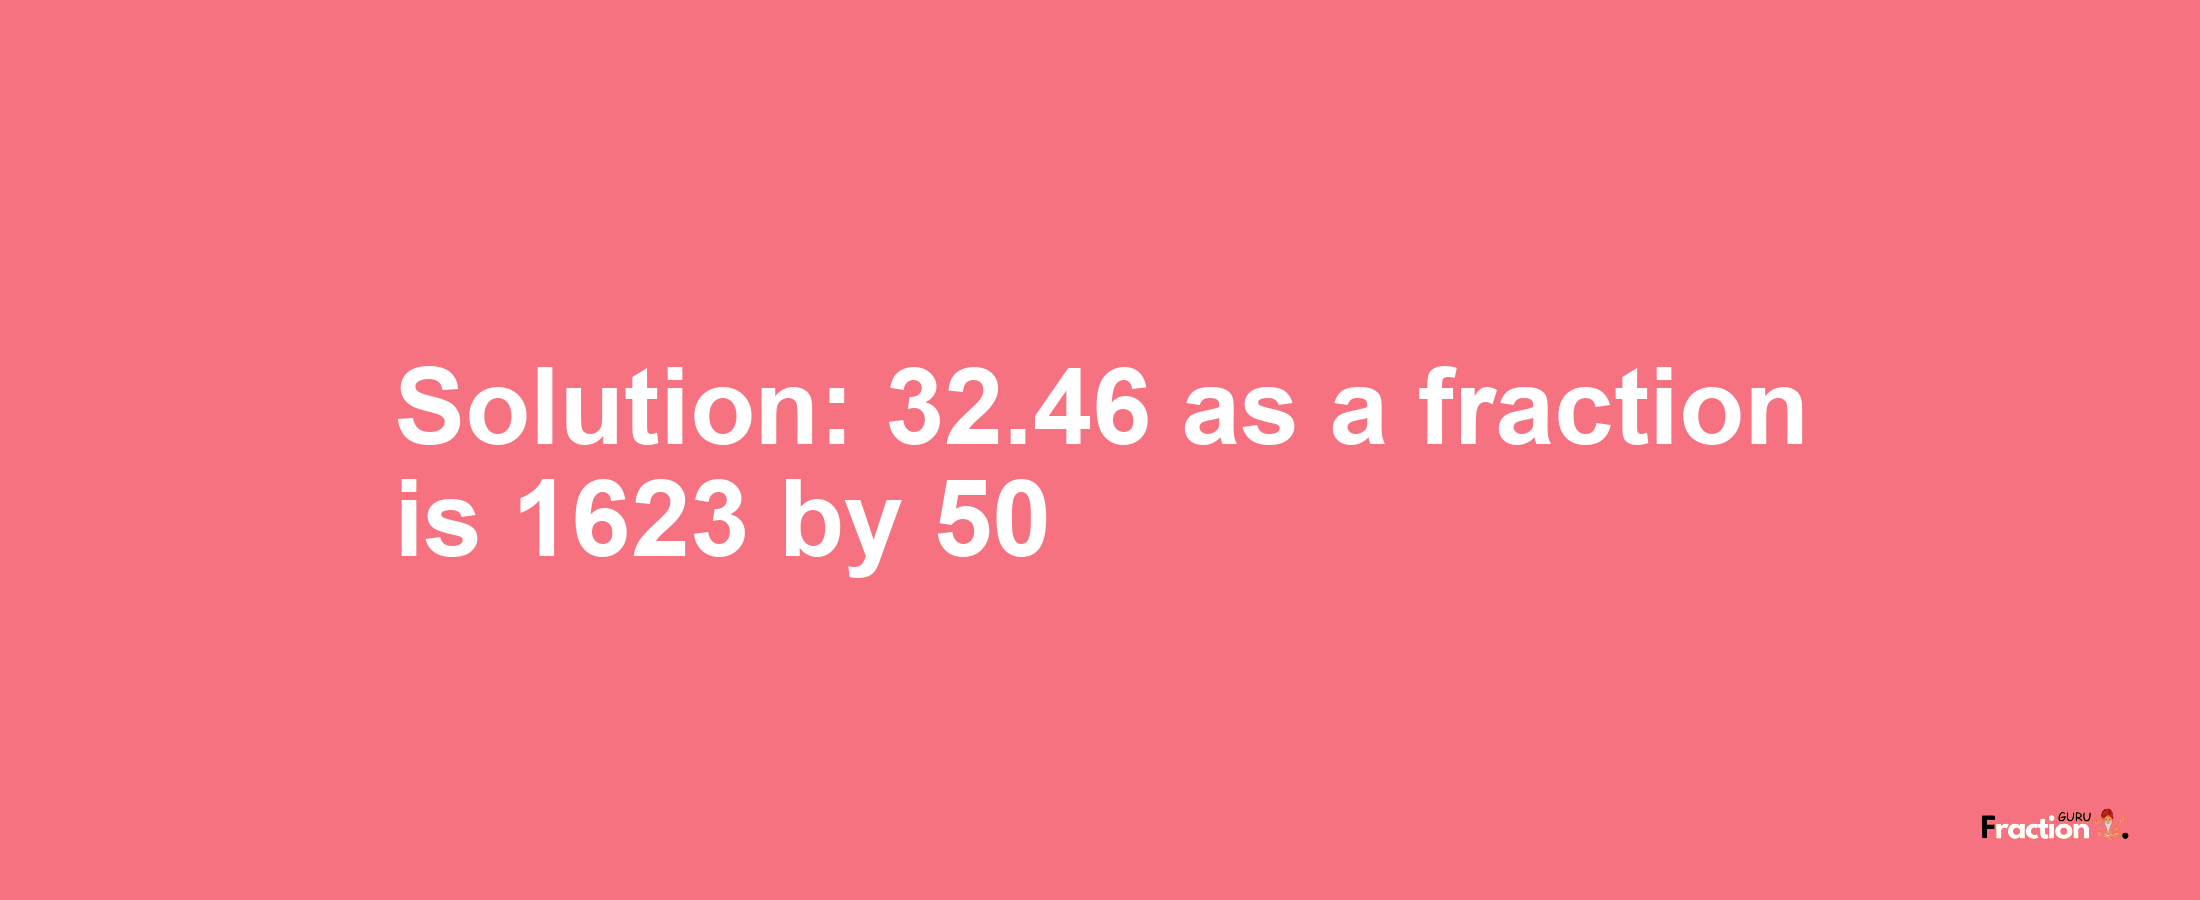 Solution:32.46 as a fraction is 1623/50